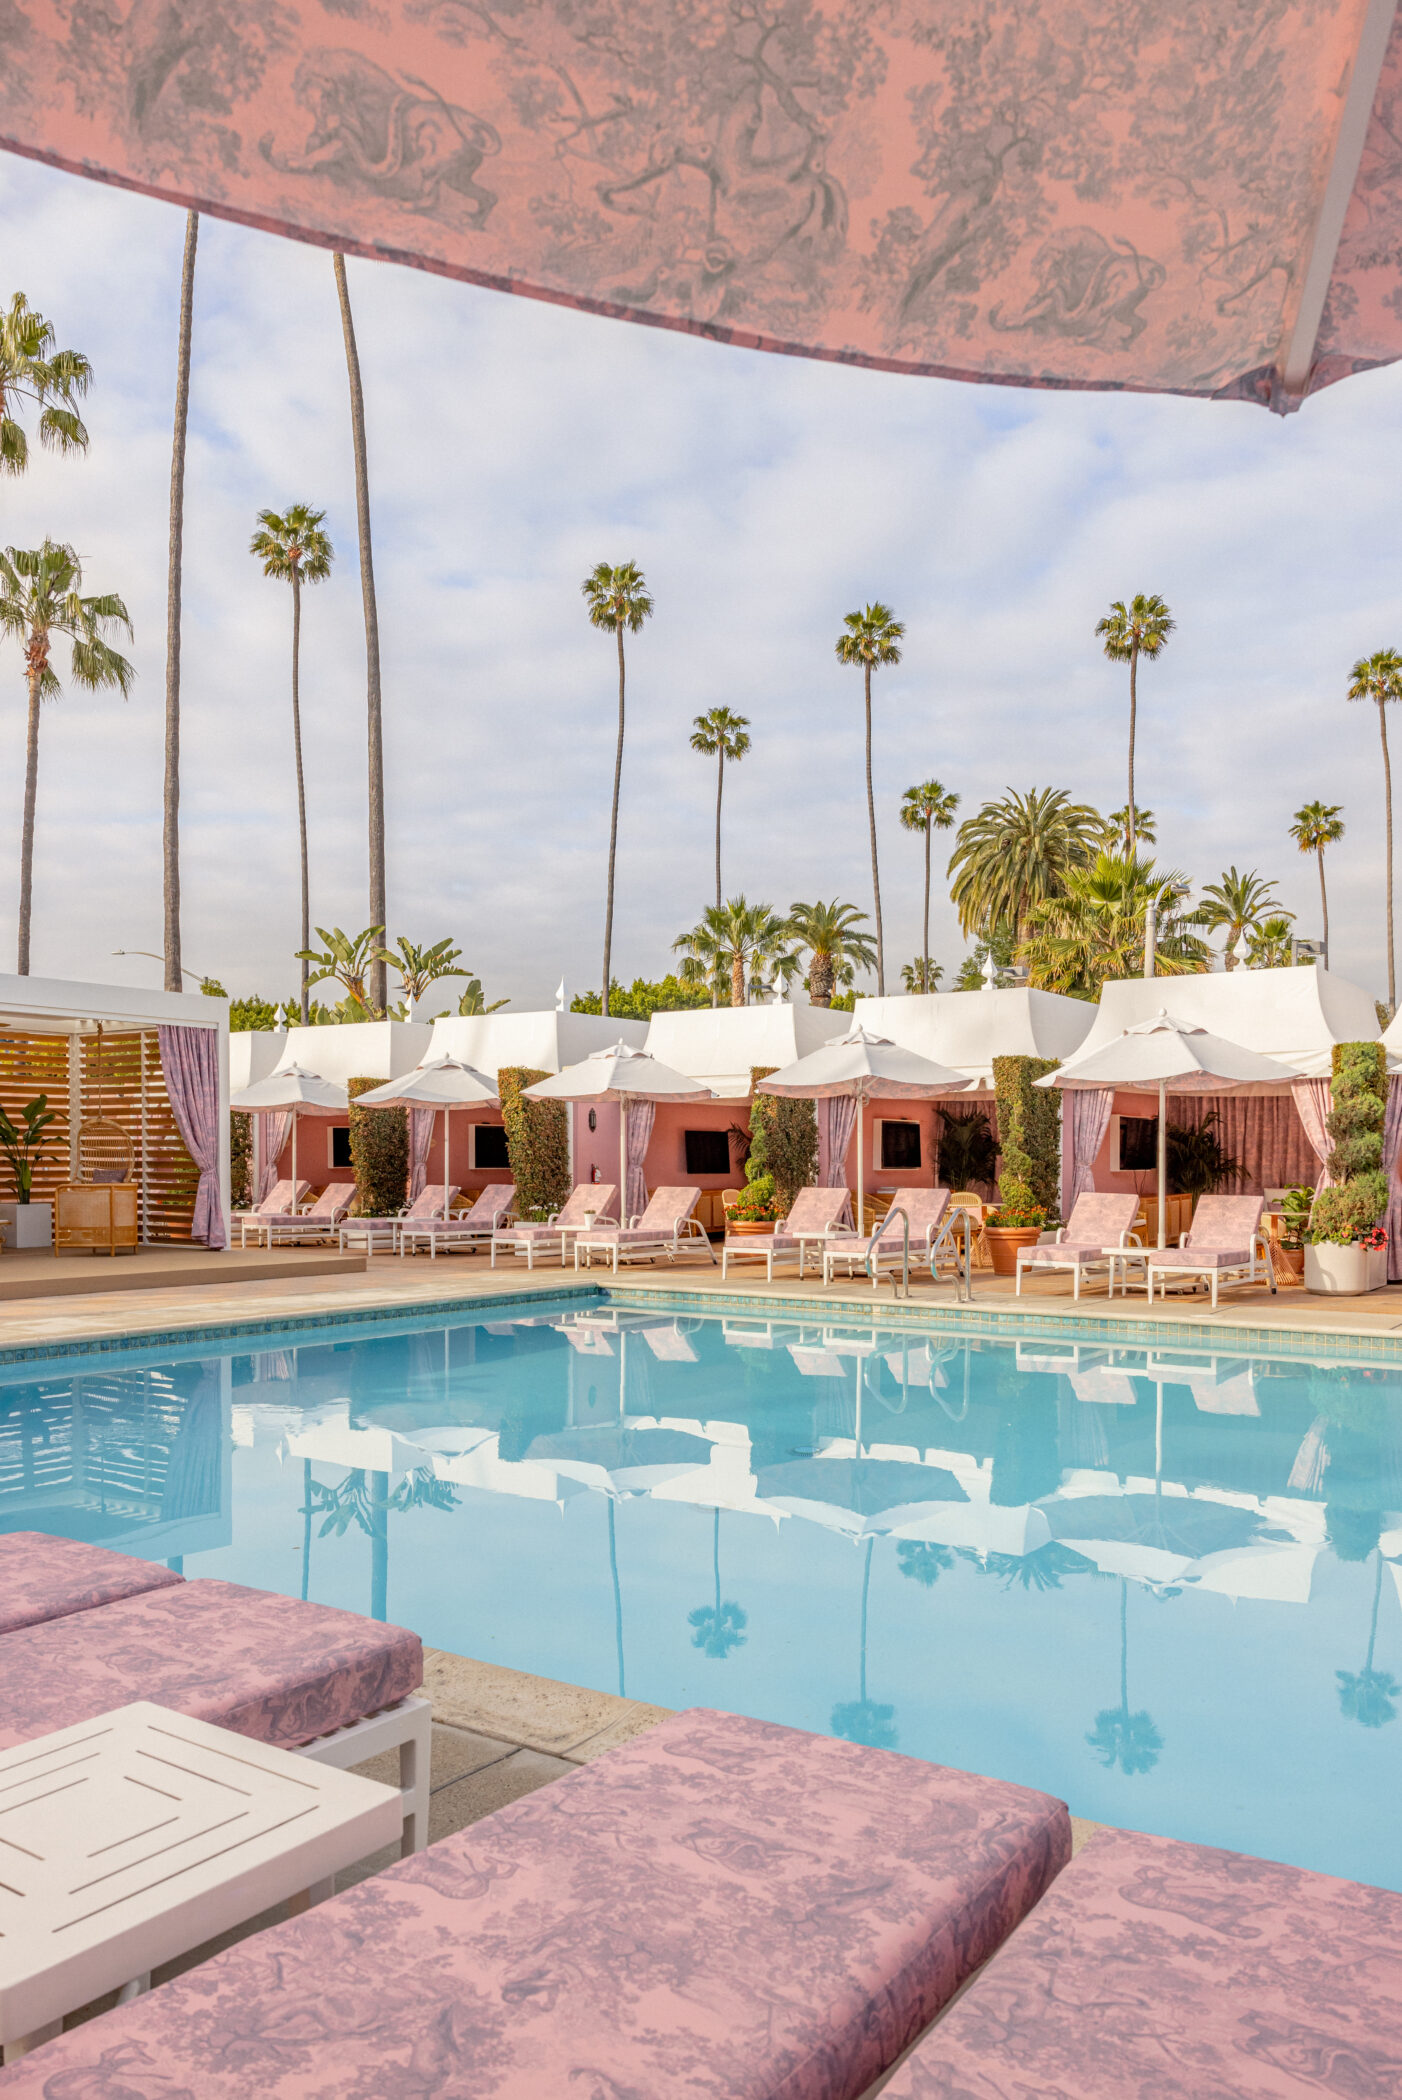 Dior Launches Dioriviera Pop-Up Experience at Beverly Hills Hotel